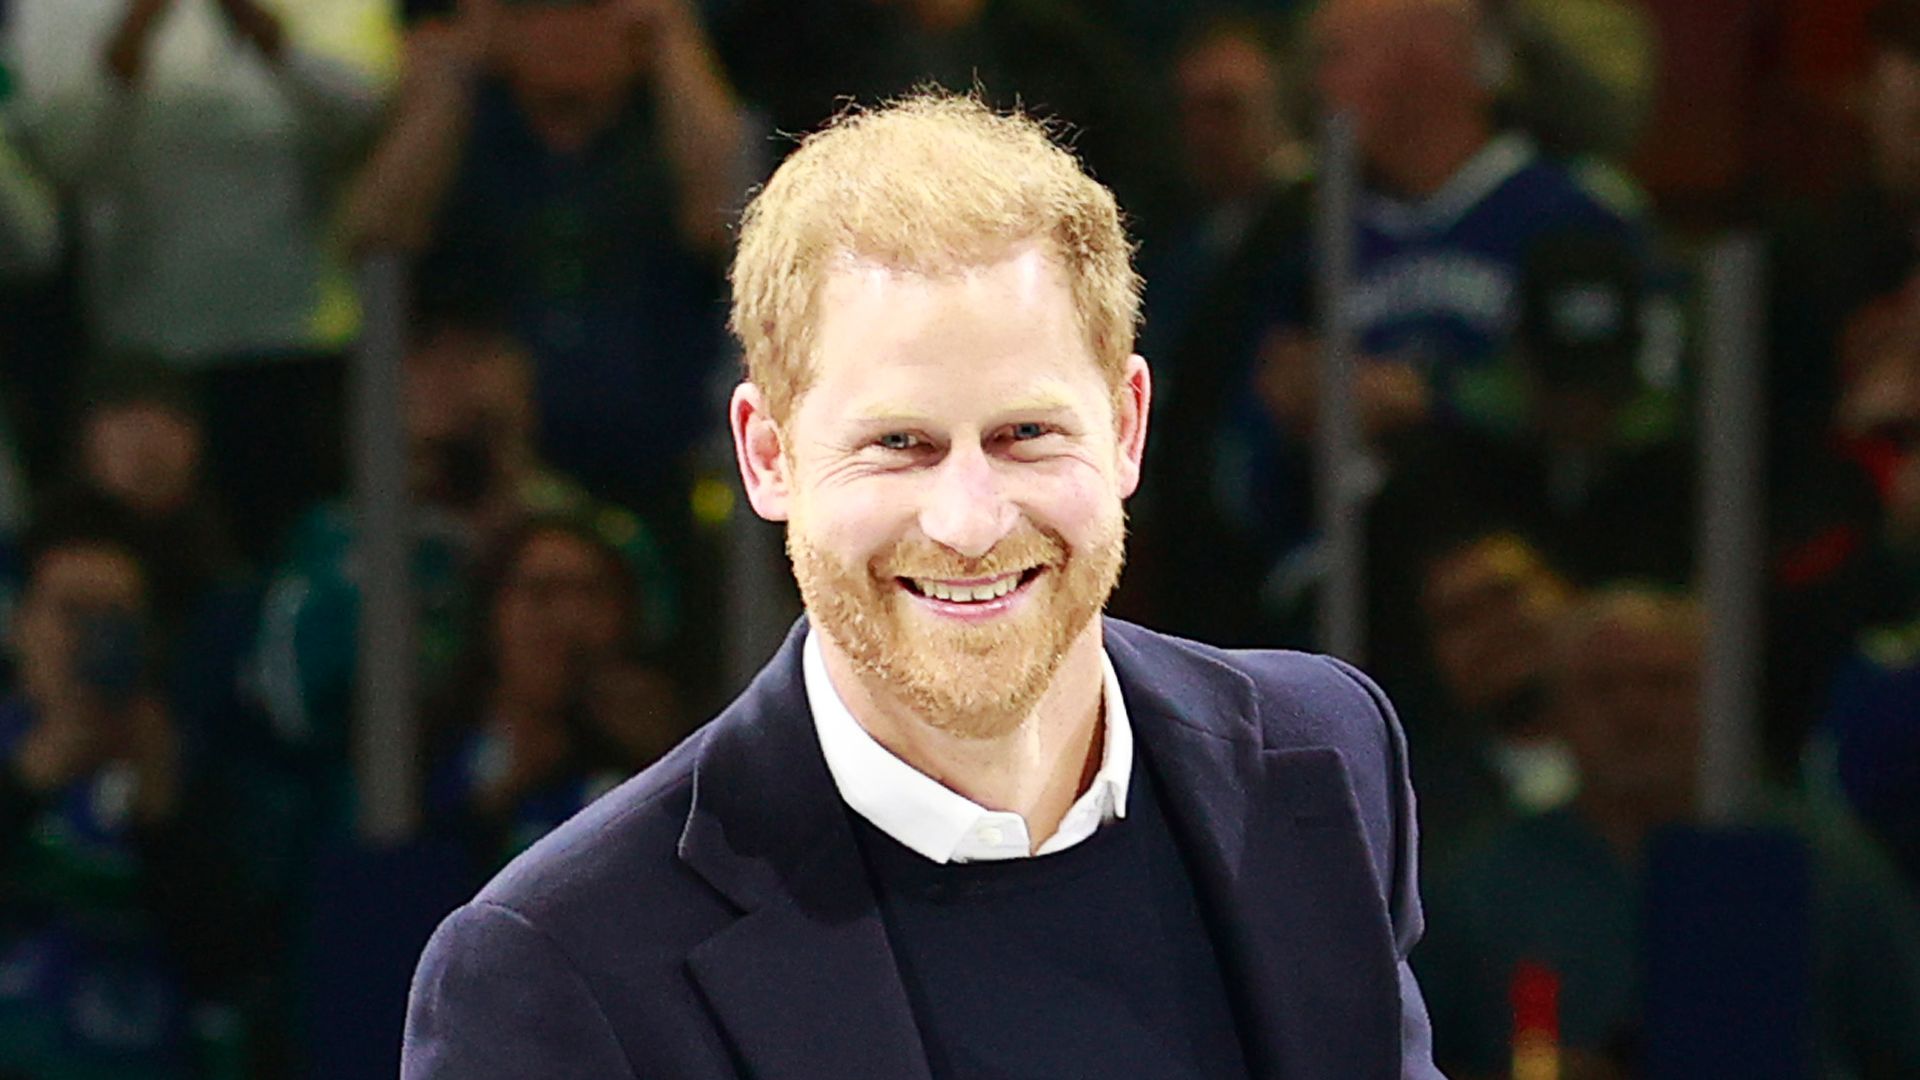 Prince Harry at Rogers Arena